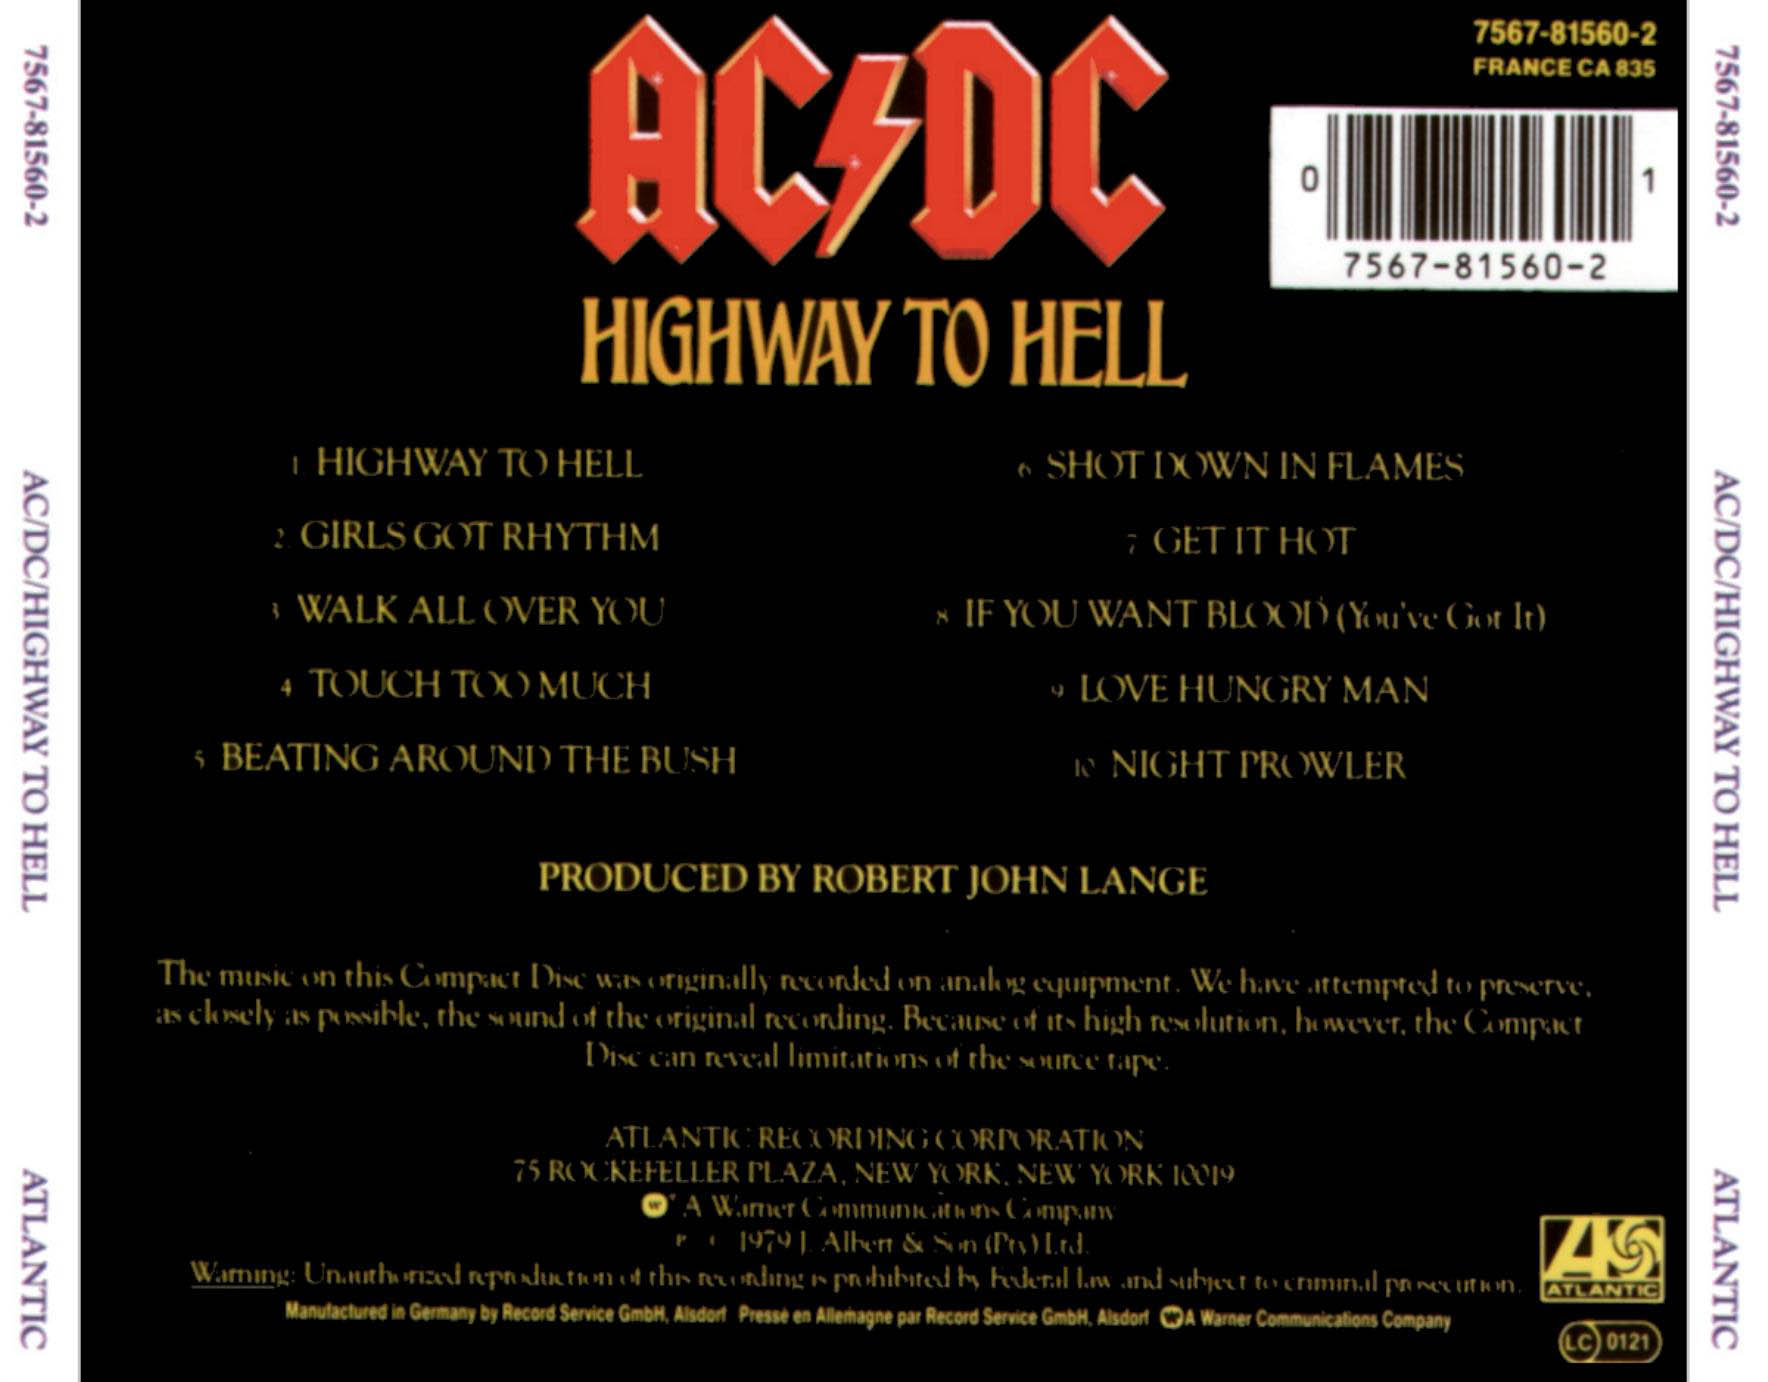 Acdc highway to hell